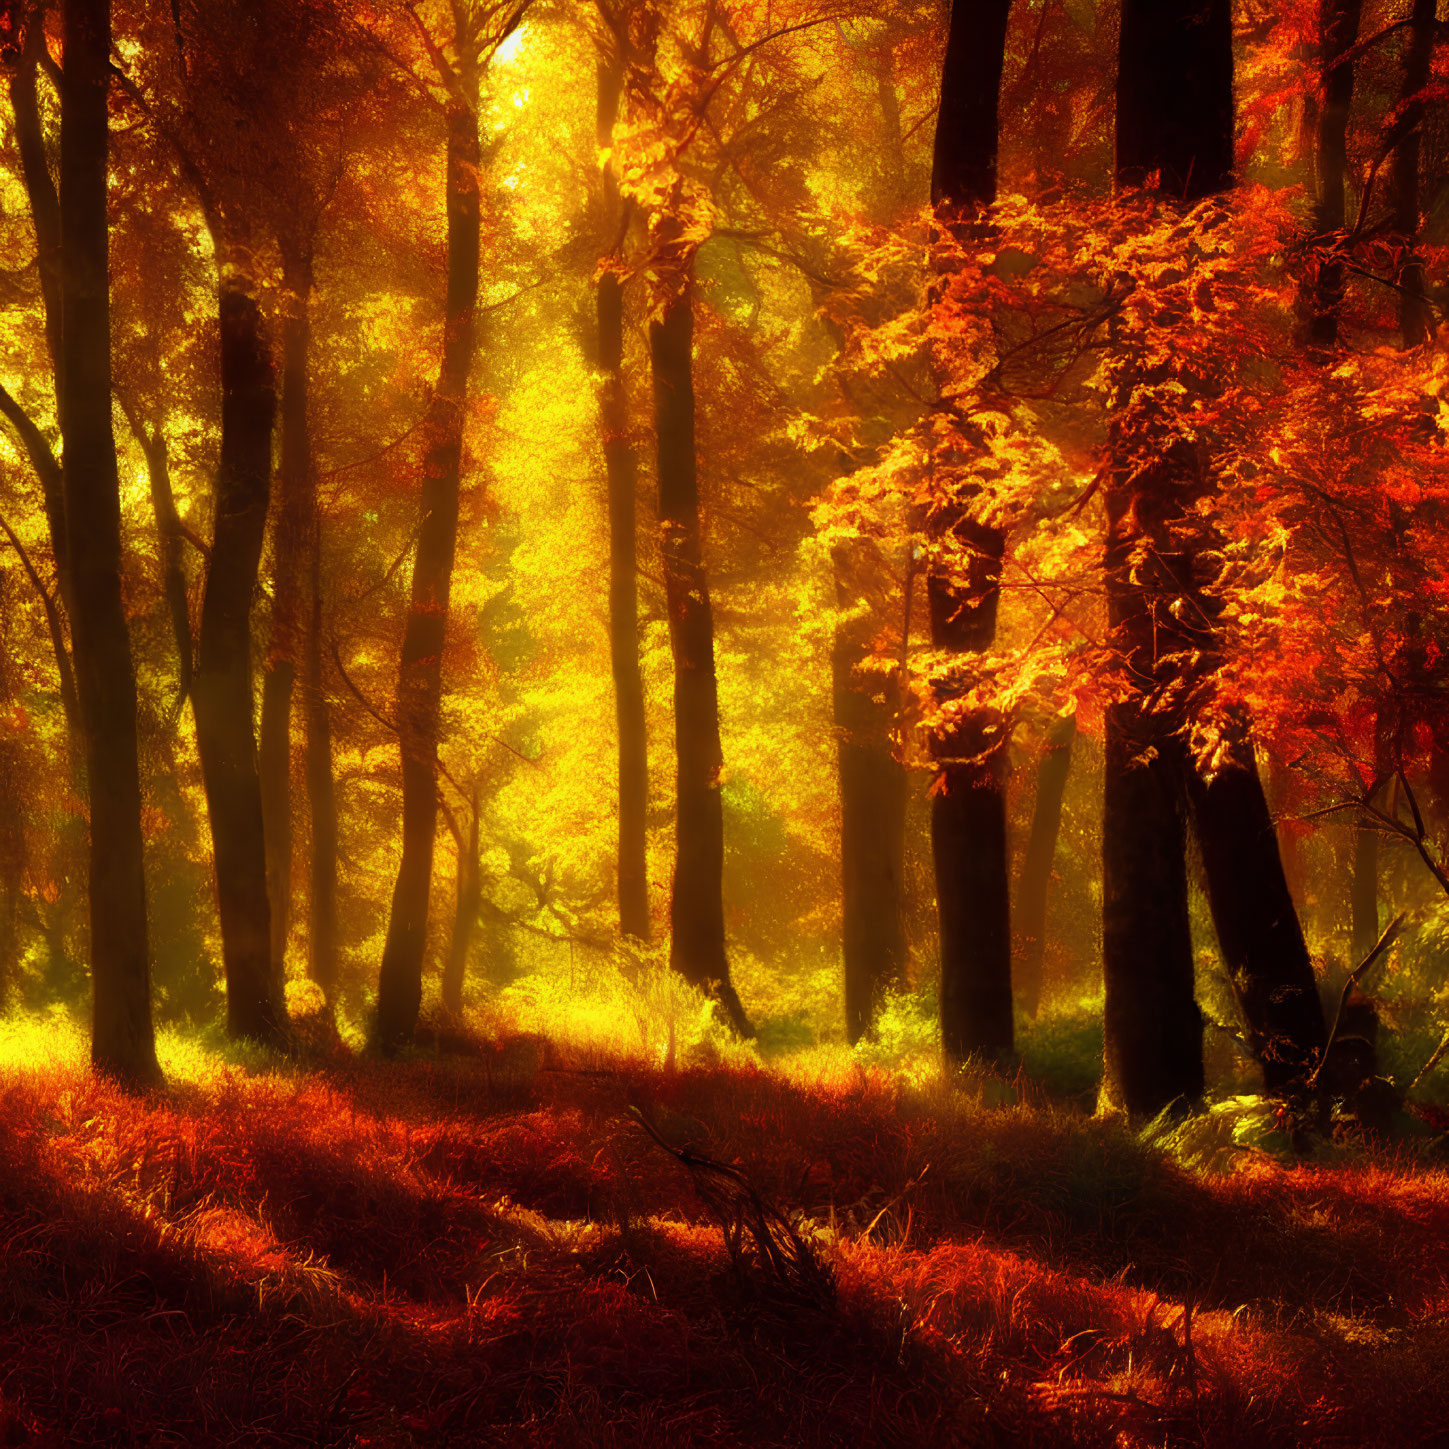 Vibrant autumn forest with red and yellow leaves in sunlight